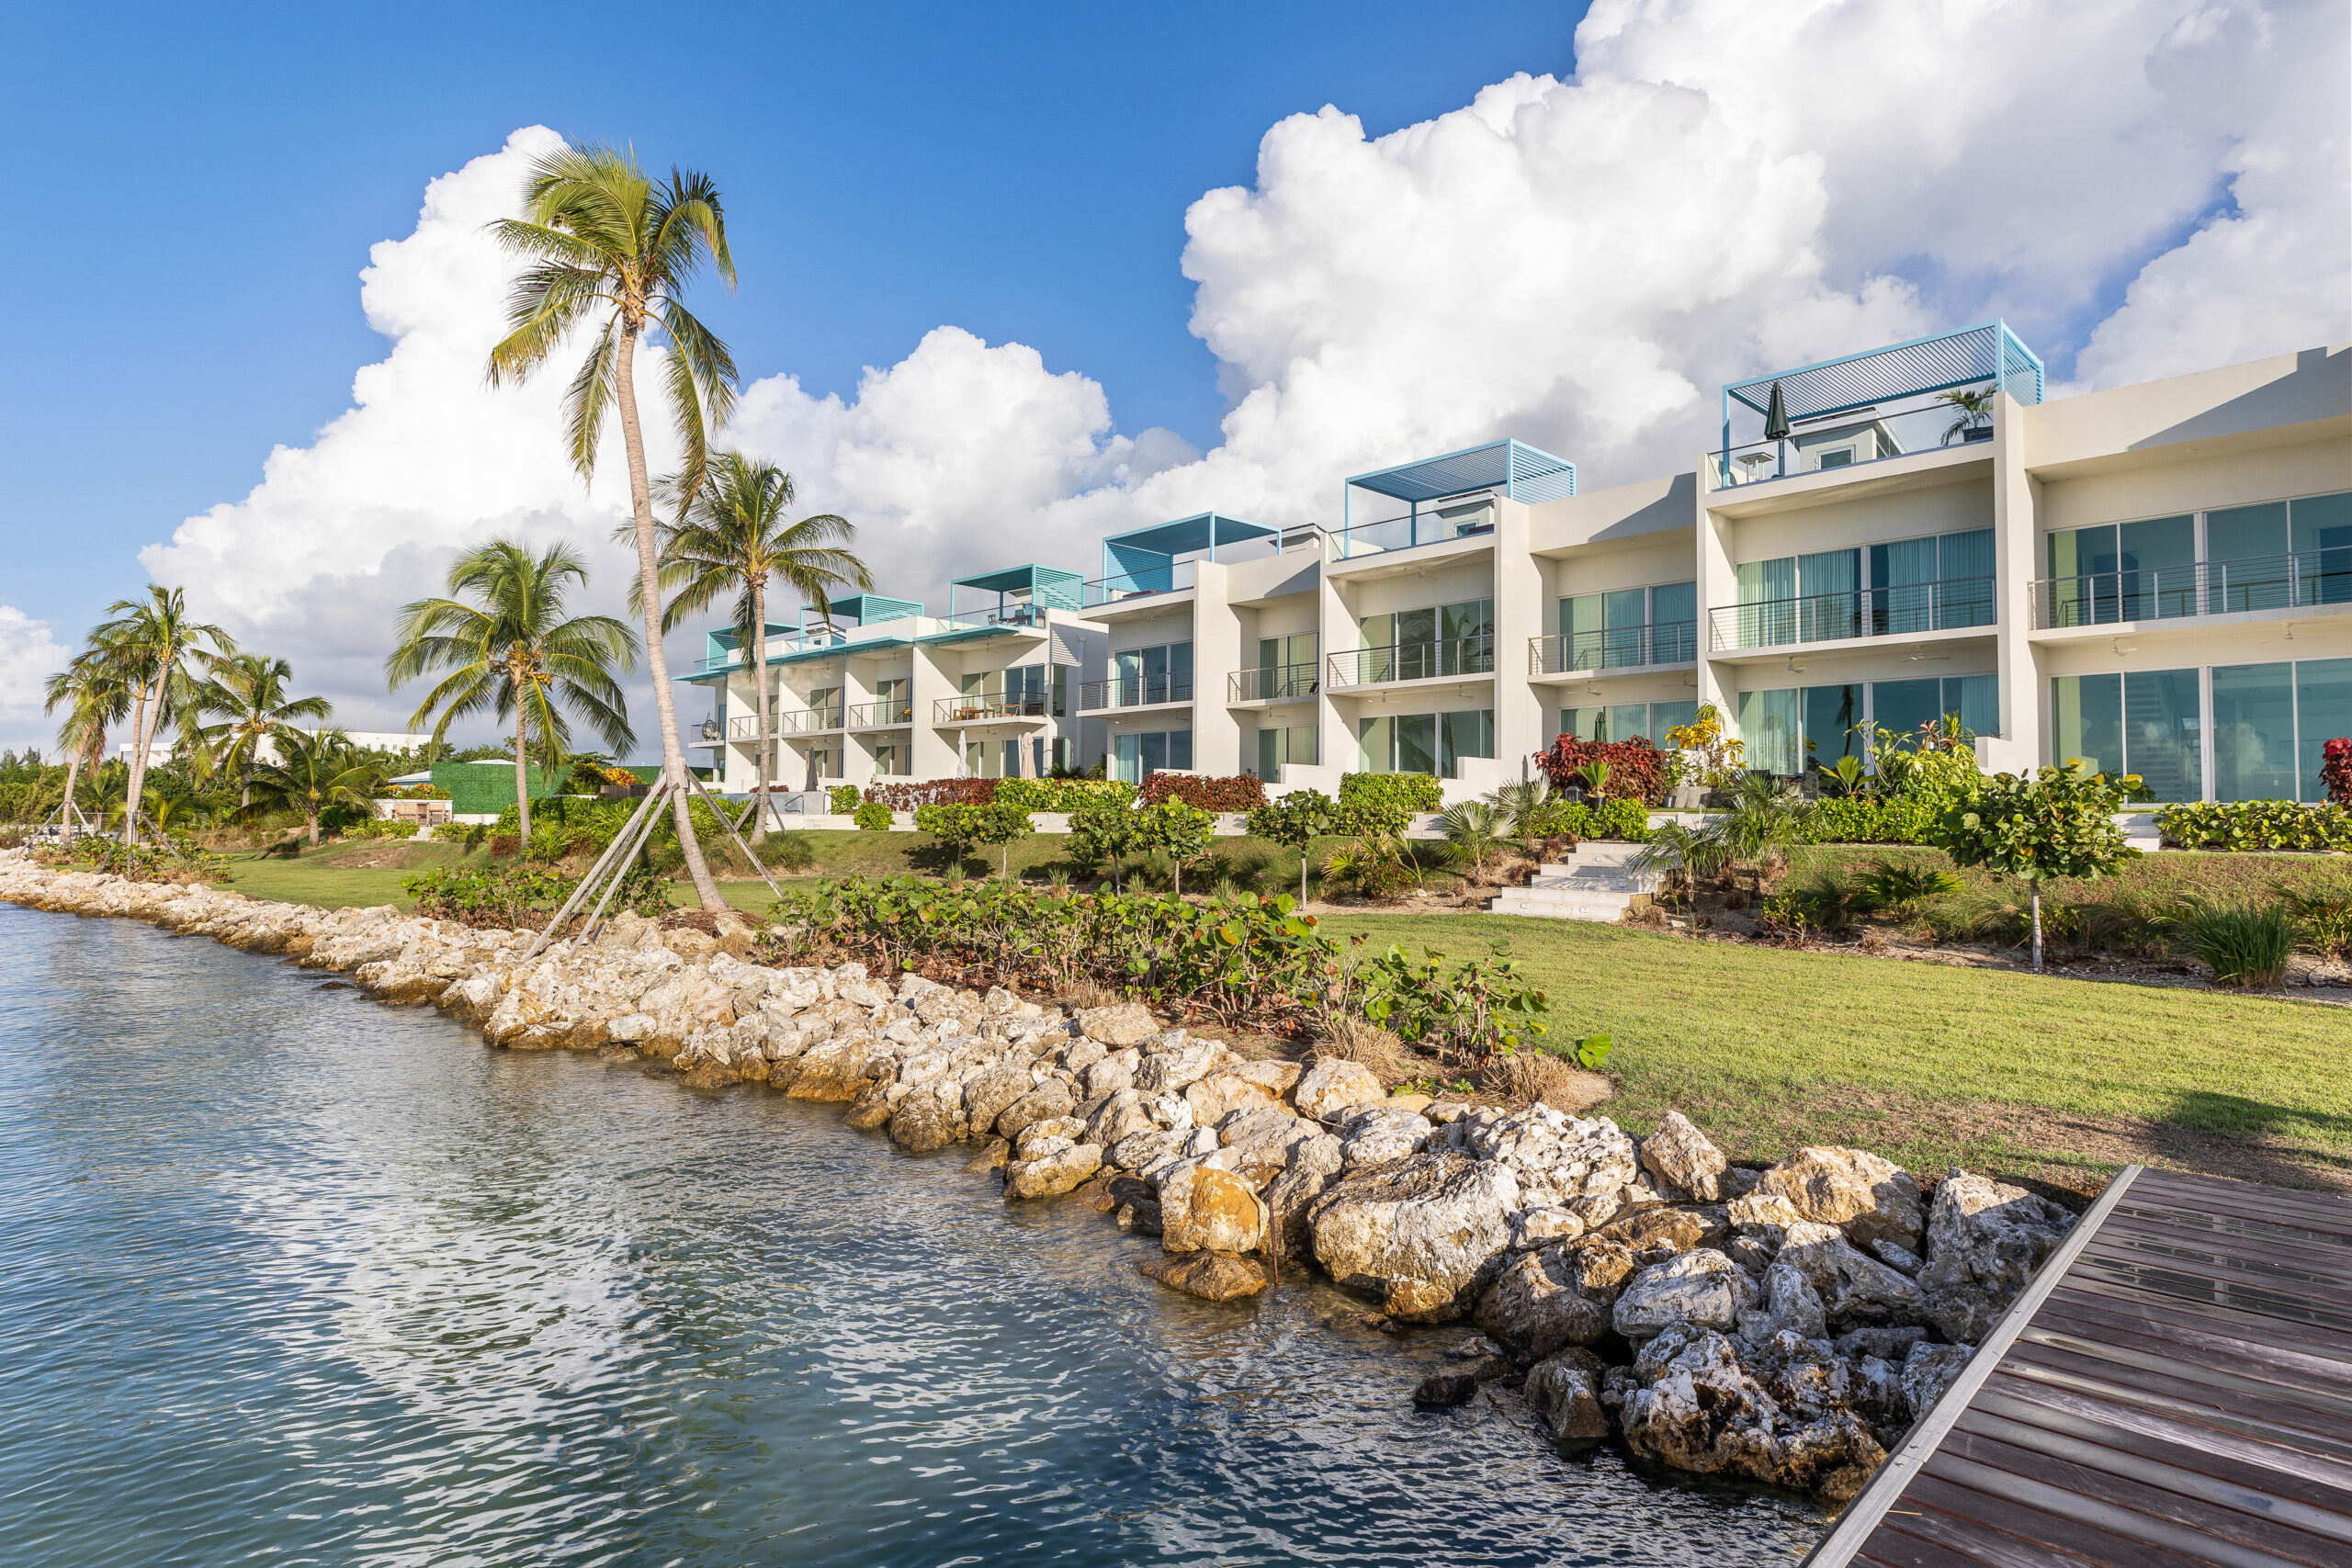 Indigo Bay Townhomes Oceanfront View